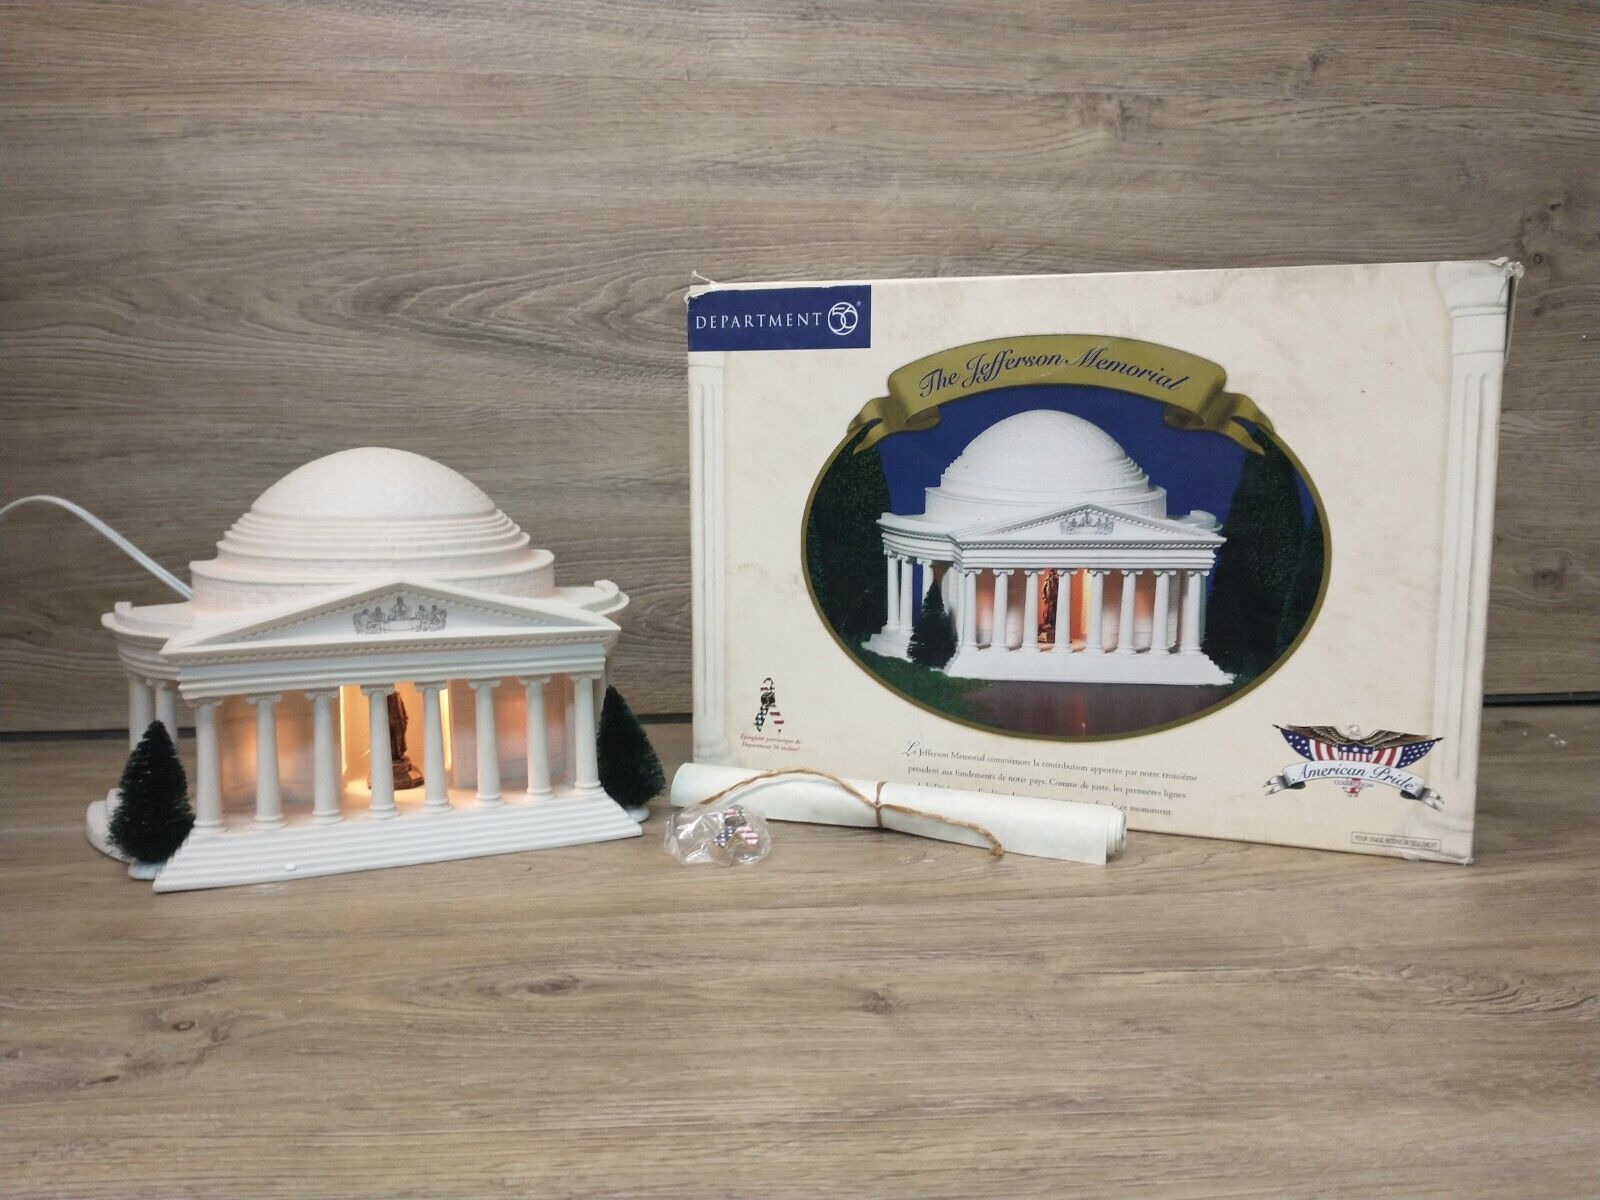 Jefferson Memorial Monument from the American Pride Collection - Department 56